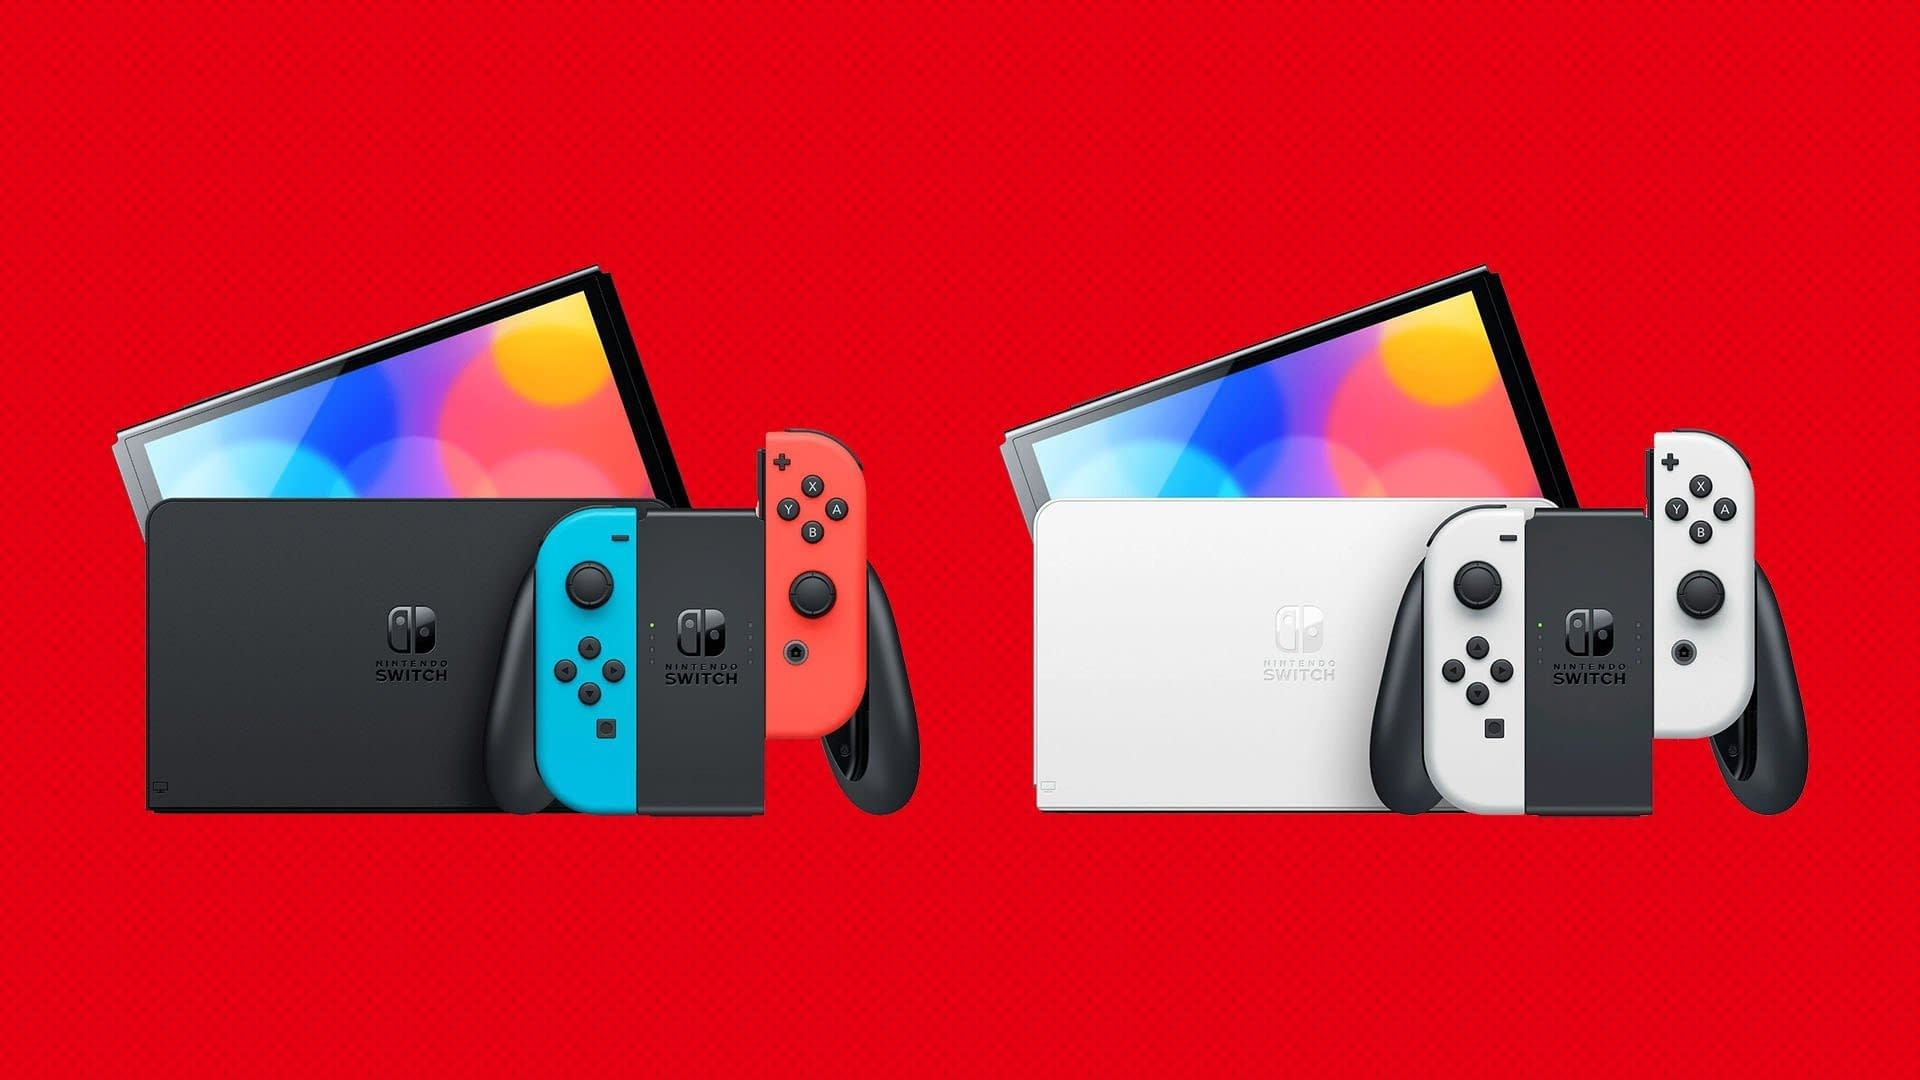 Switch Console Sales Reached 122.55 Million